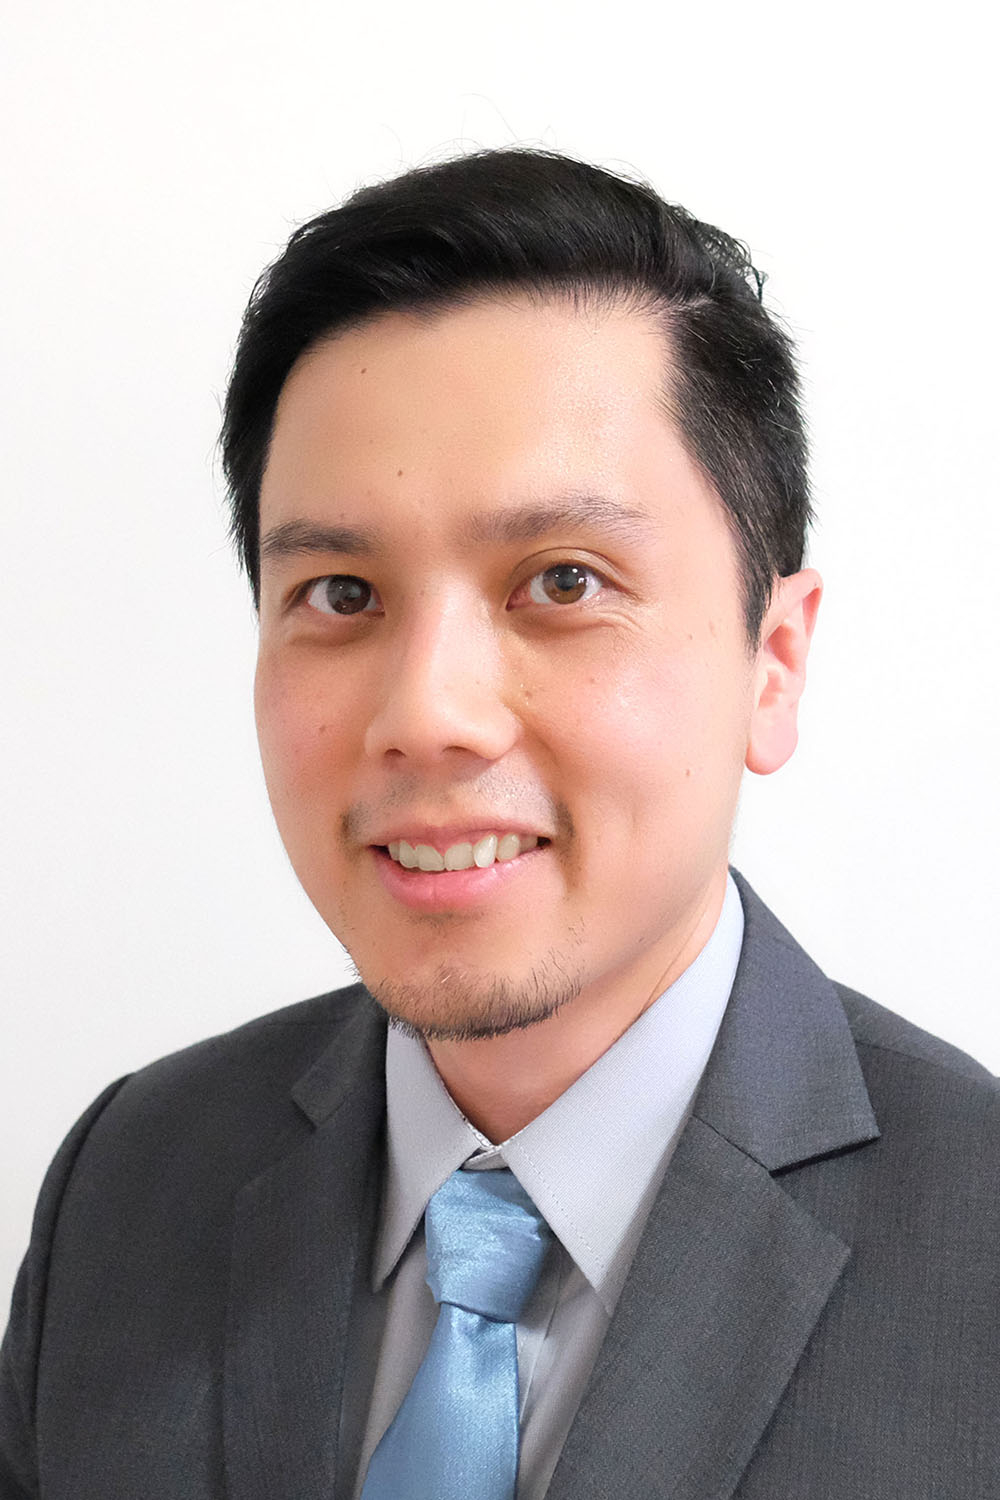 Dr Clement Yong, Core Faculty, Diagnostic Radiology Residency Programme, NUHS